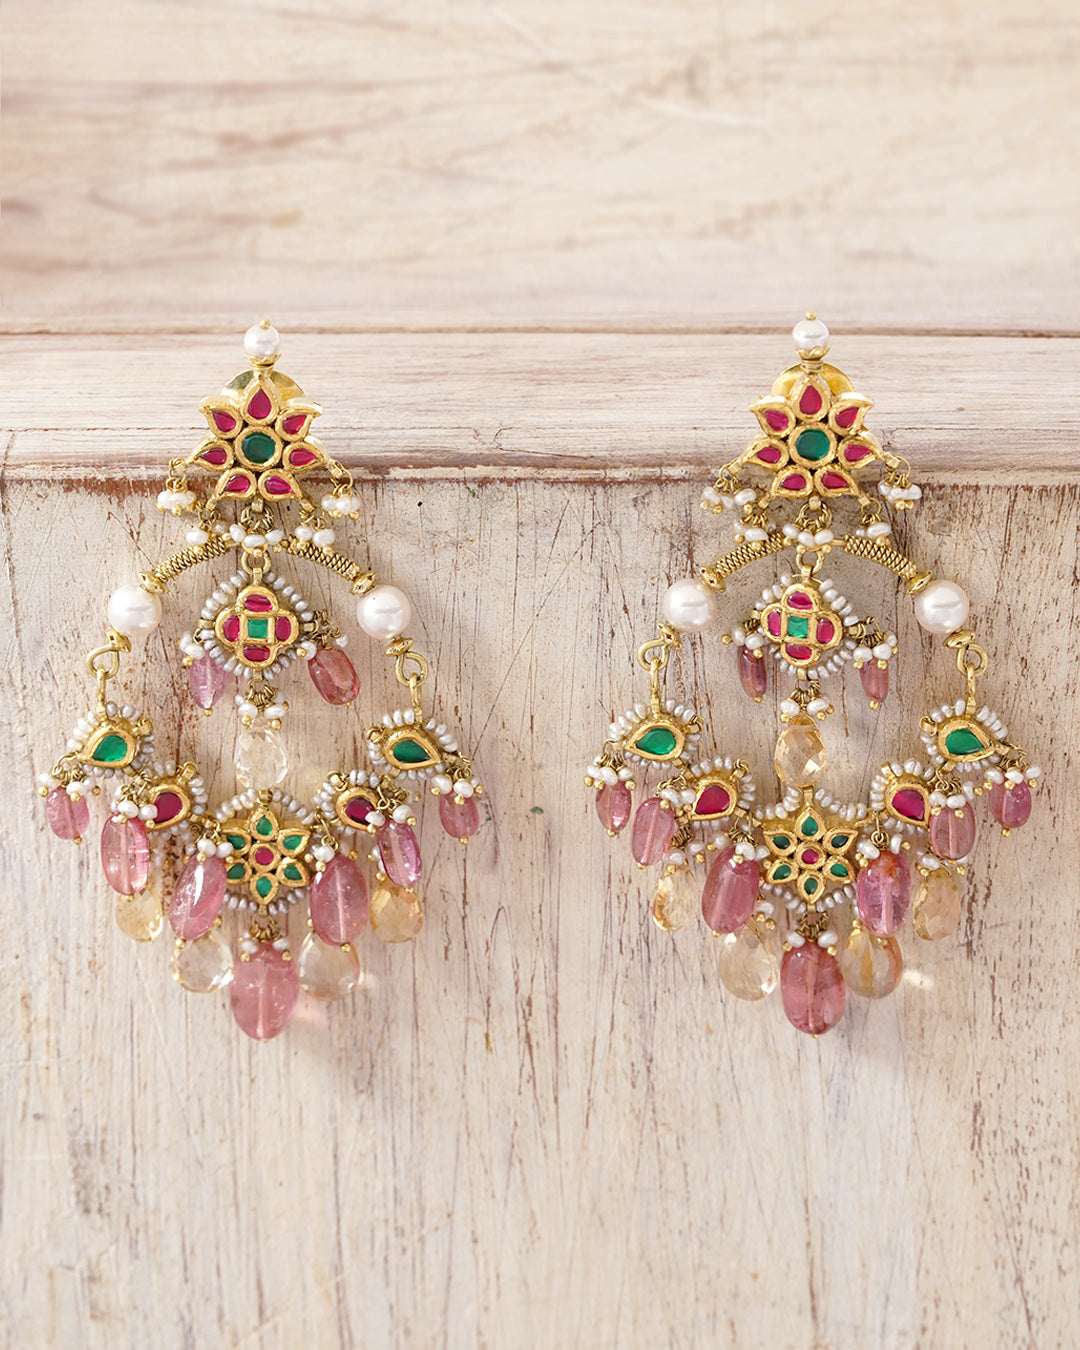 Incredible Collection of Full 4K Earrings Images – Top 999+ Earrings Images